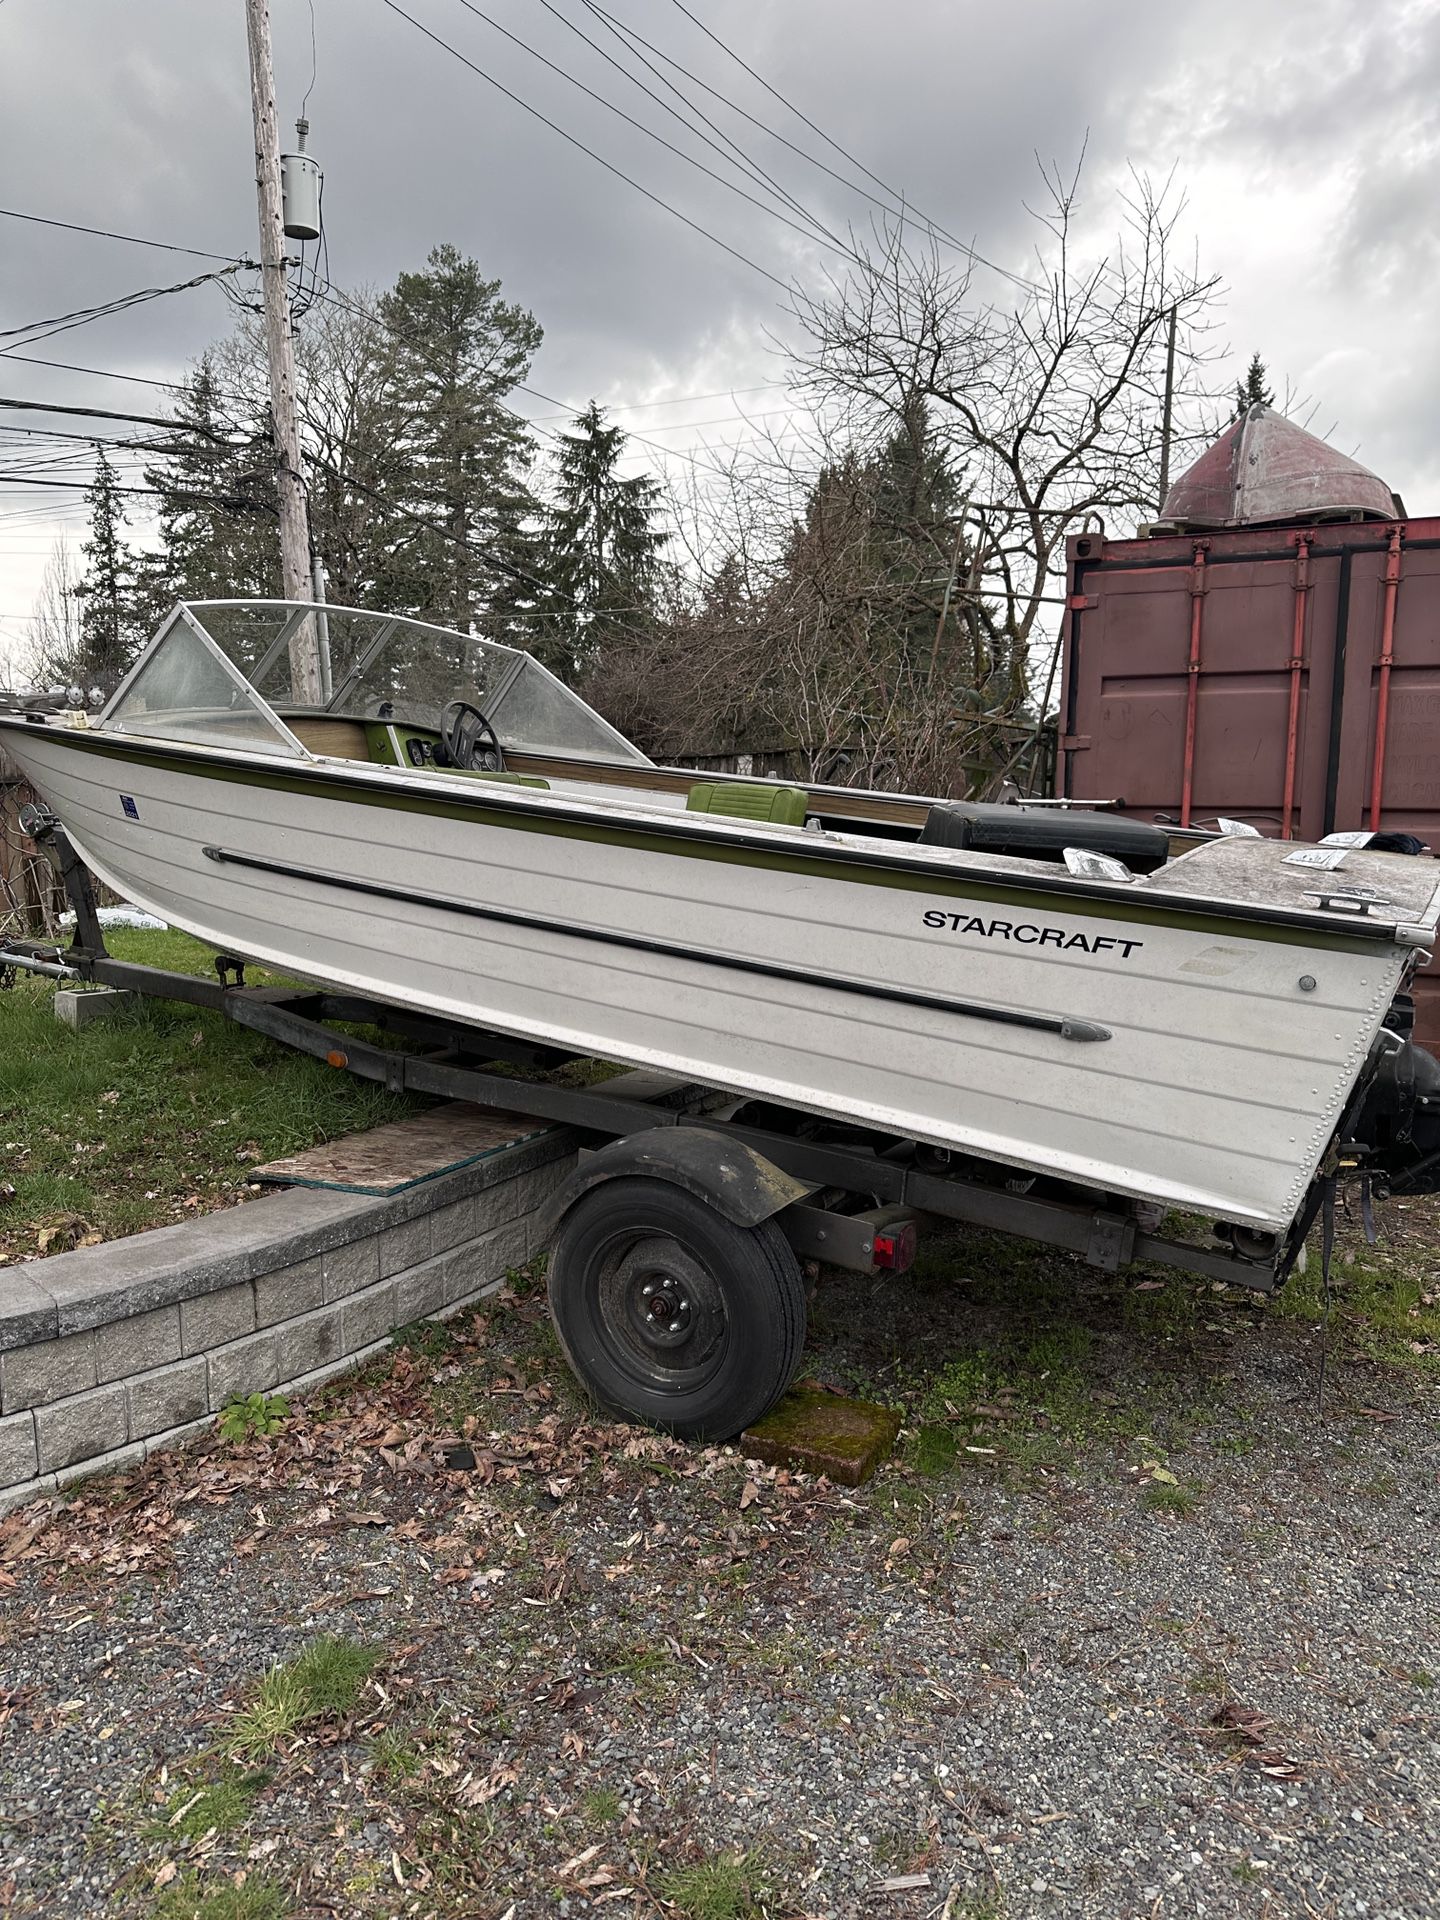 1973 Old School Thick Aluminum Boat